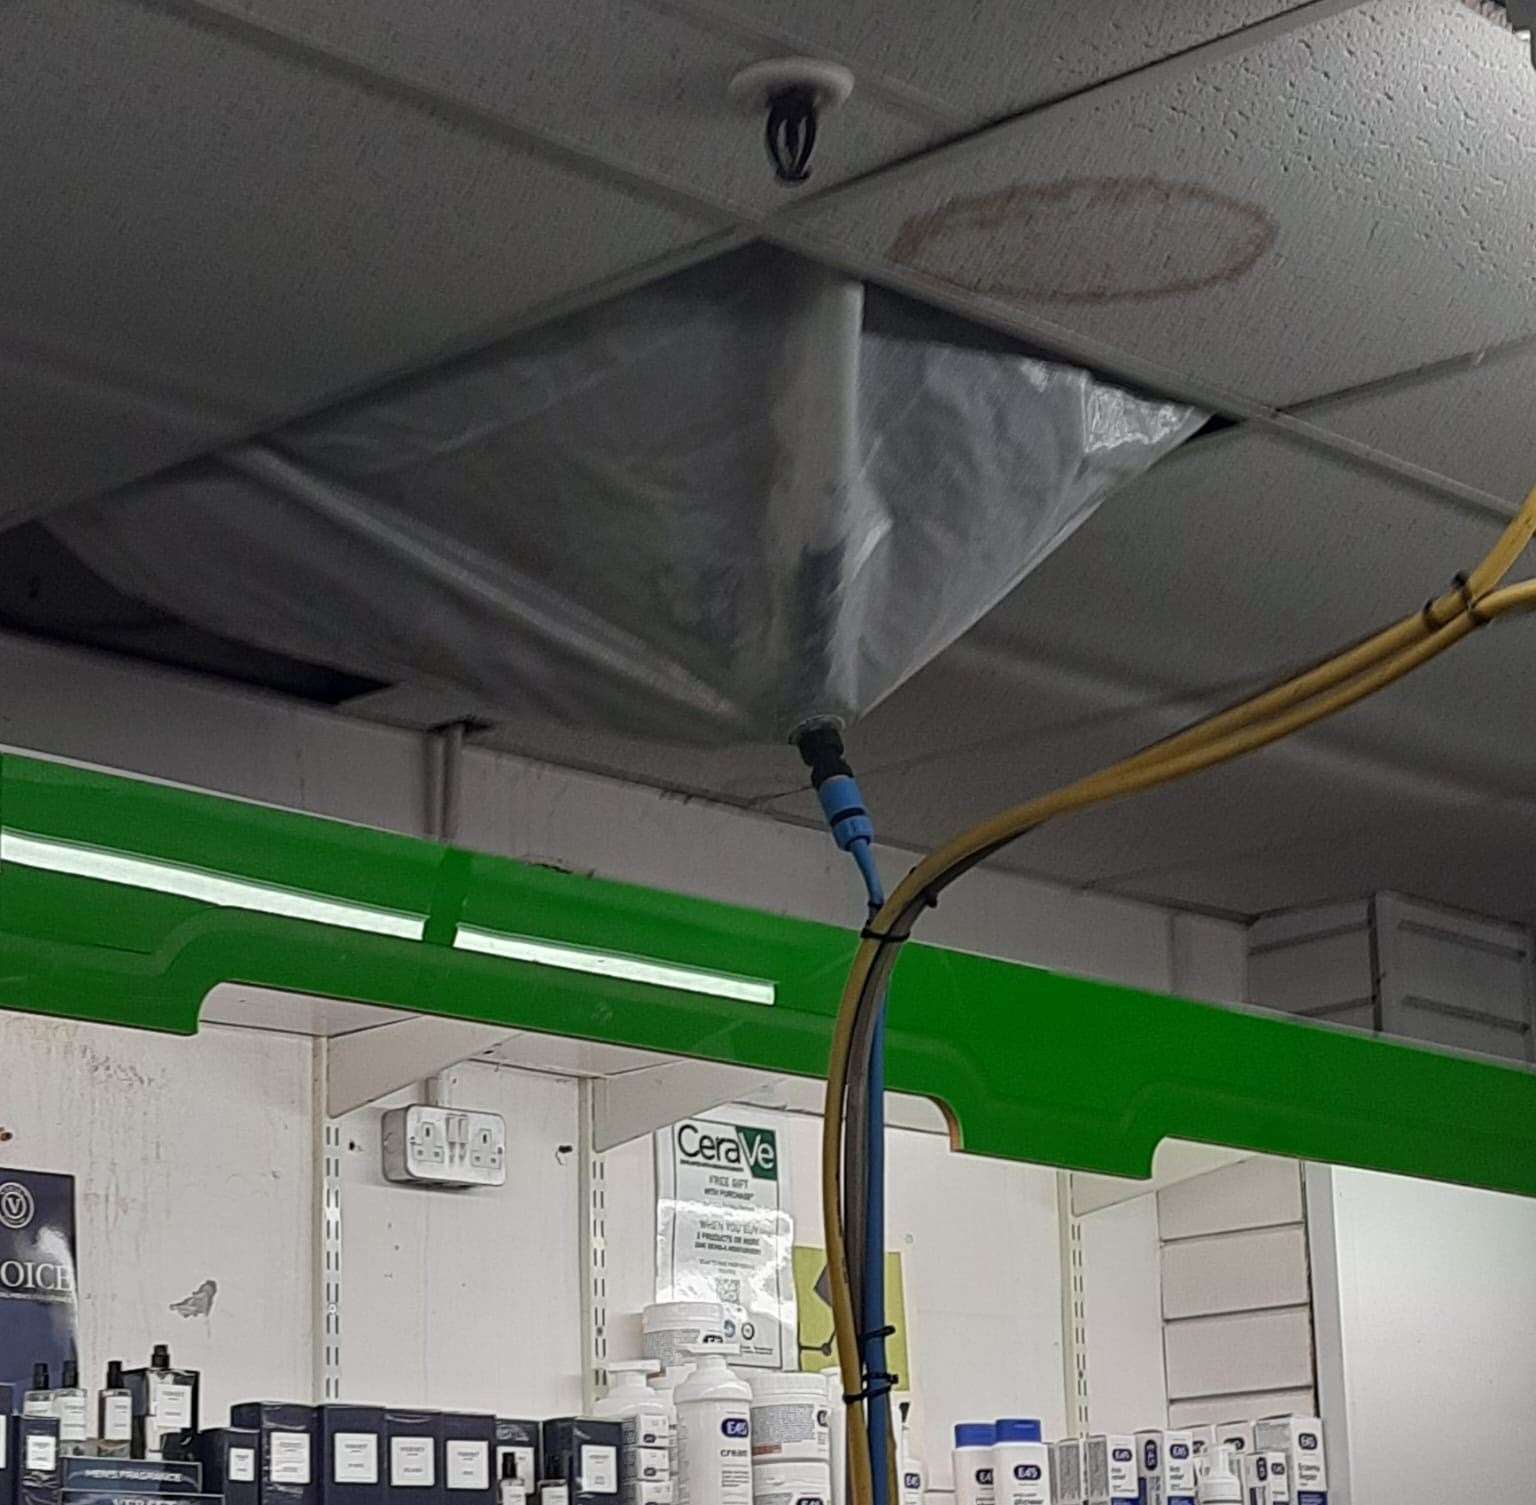 The Village Pharmacy in New Ash Green has been contending with a leaking ceiling for more than a year. Photo credit: Laura Manston